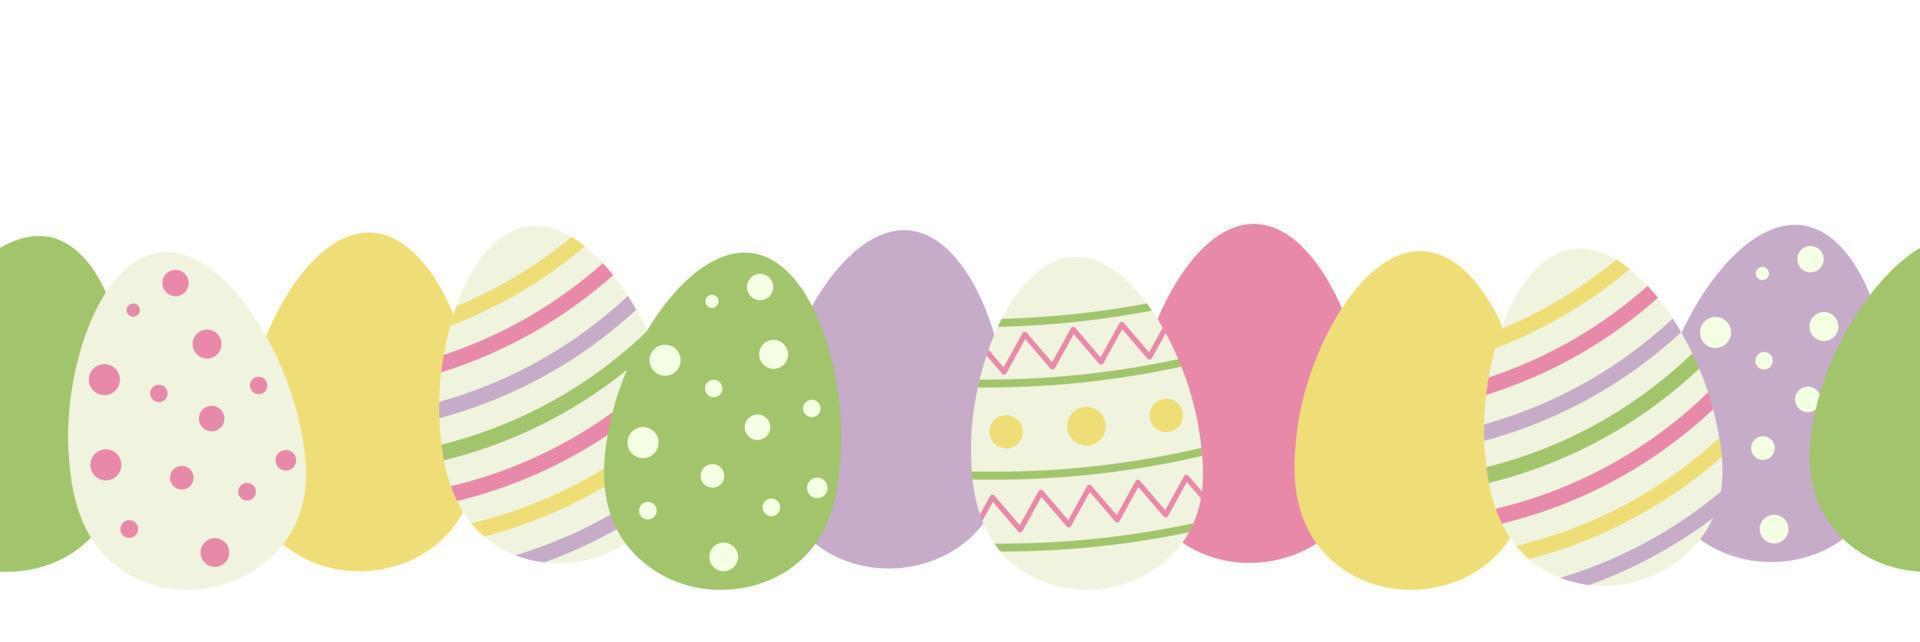 Easter seamless border with colorful eggs vector